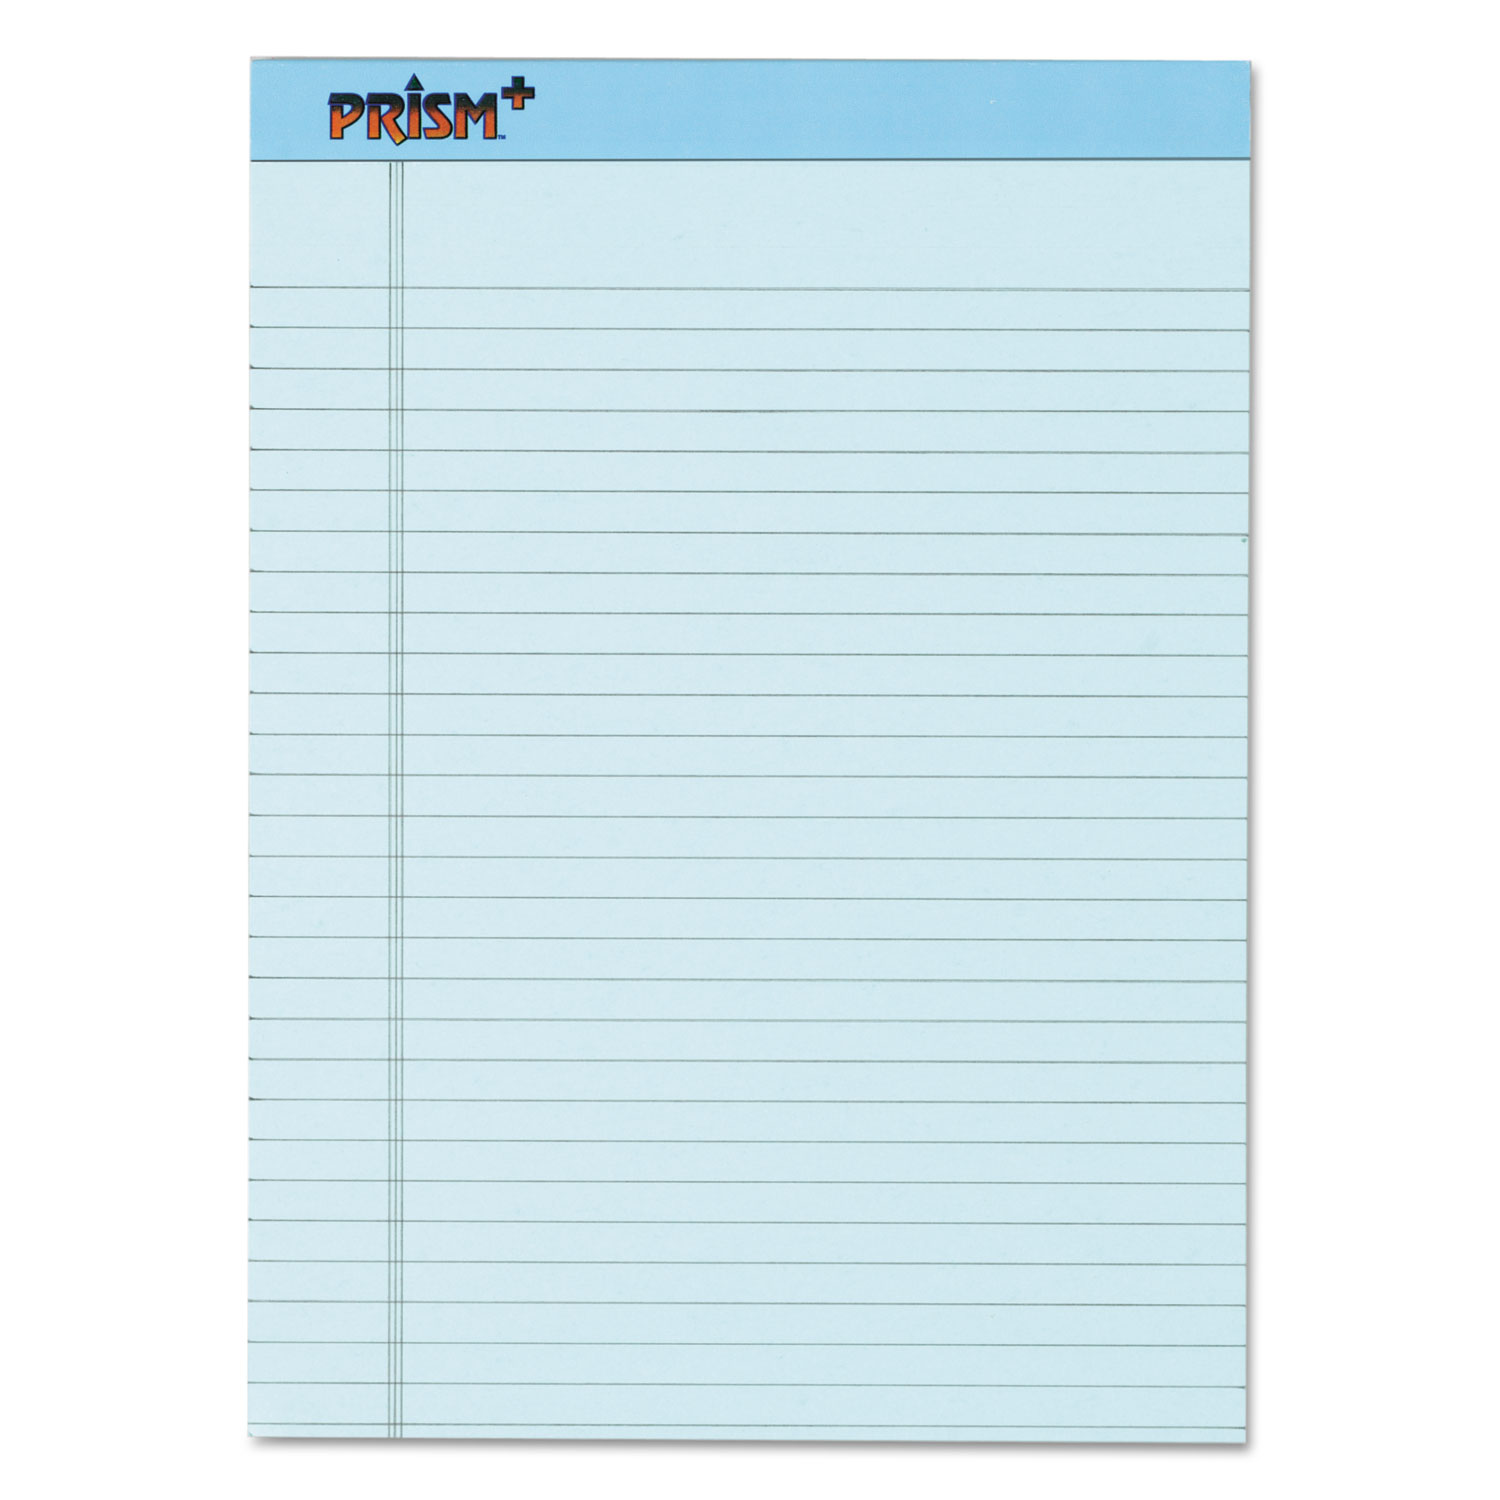  TOPS 63120 Prism + Writing Pads, Wide/Legal Rule, 8.5 x 11.75, Pastel Blue, 50 Sheets, 12/Pack (TOP63120) 